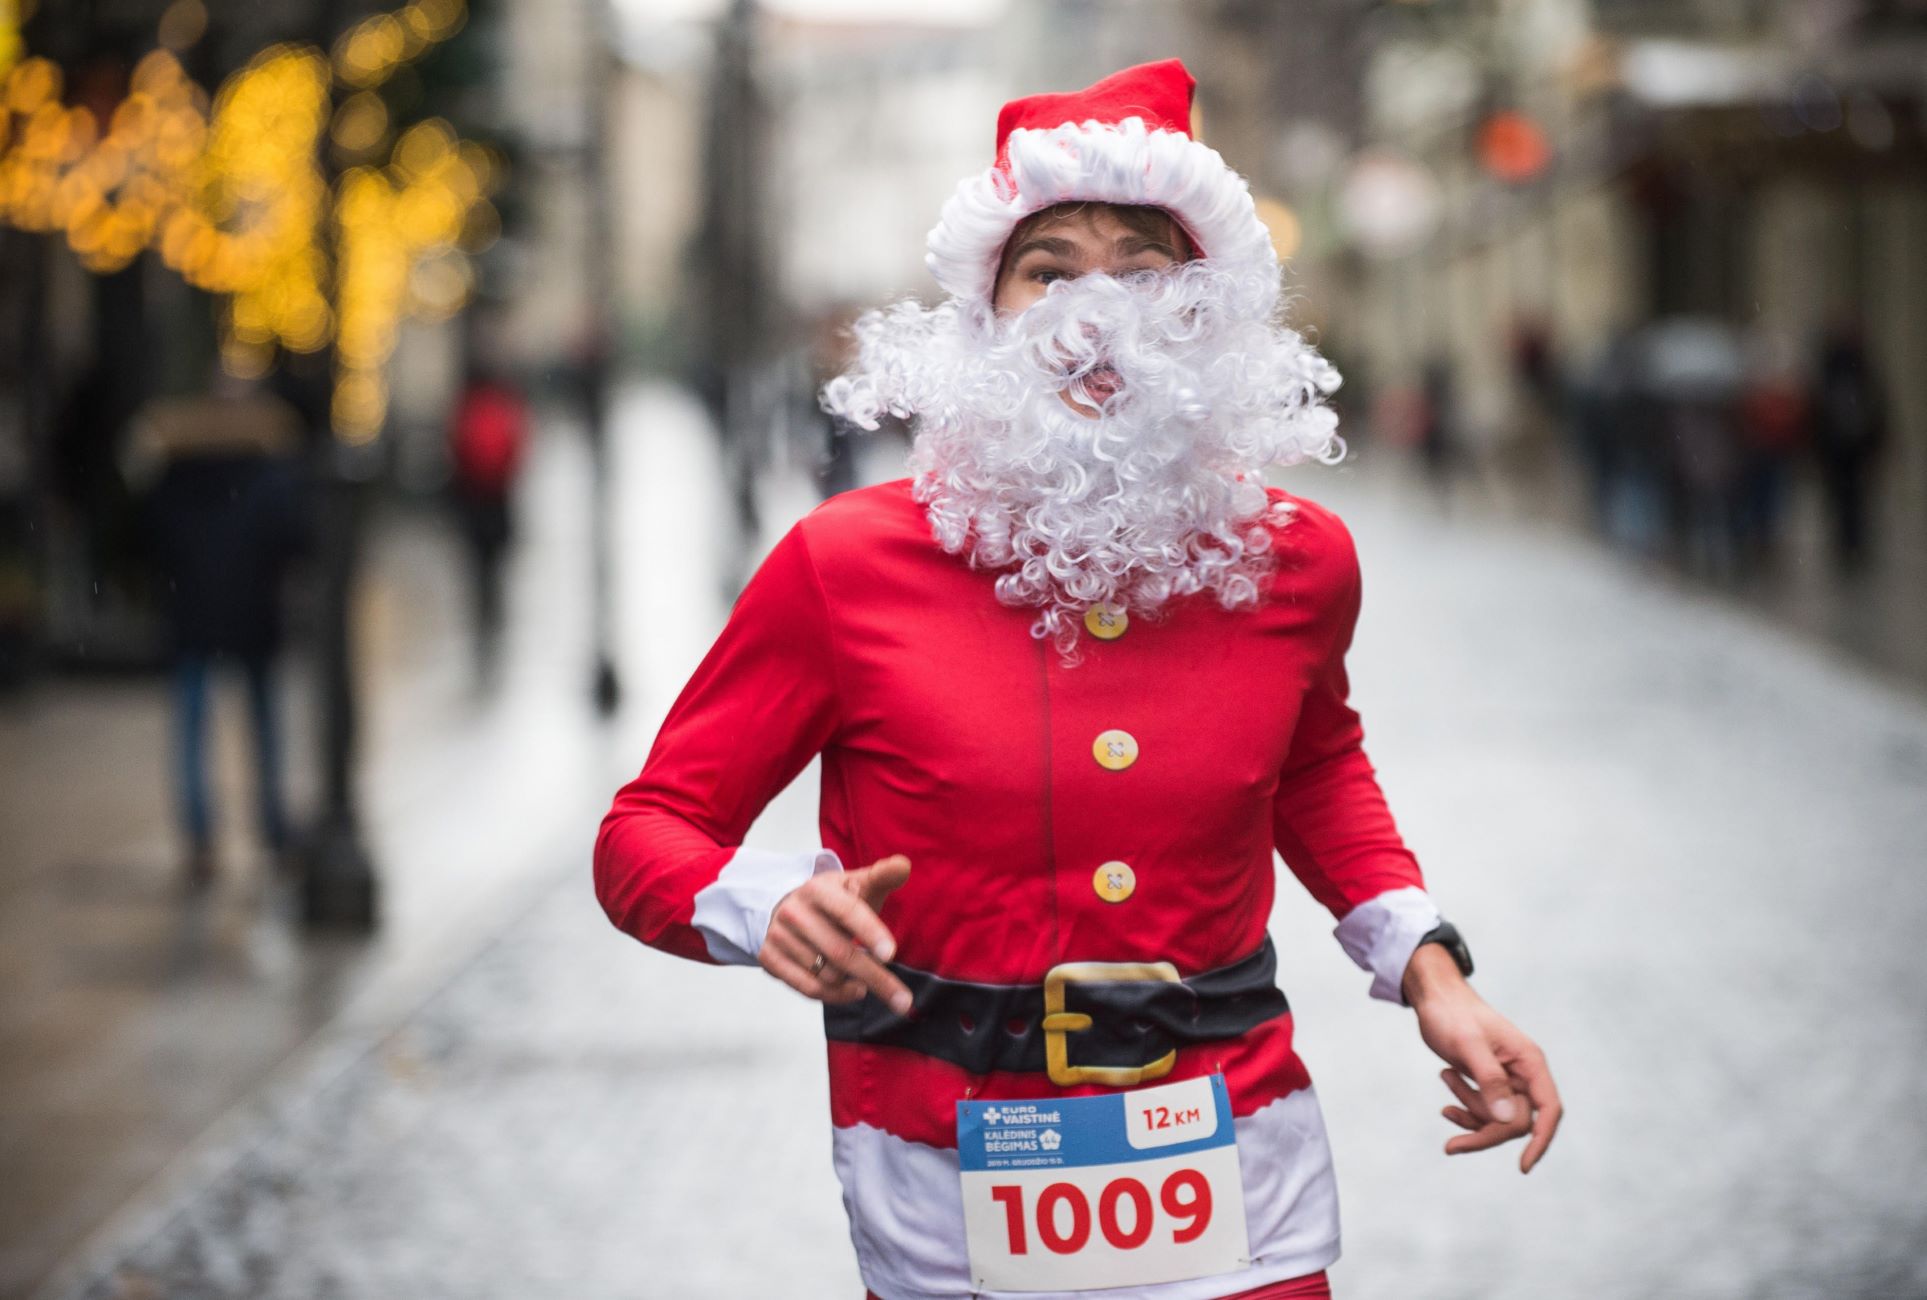 10 Tips For Running On Christmas Day: Making The Most Of Your Holiday Run